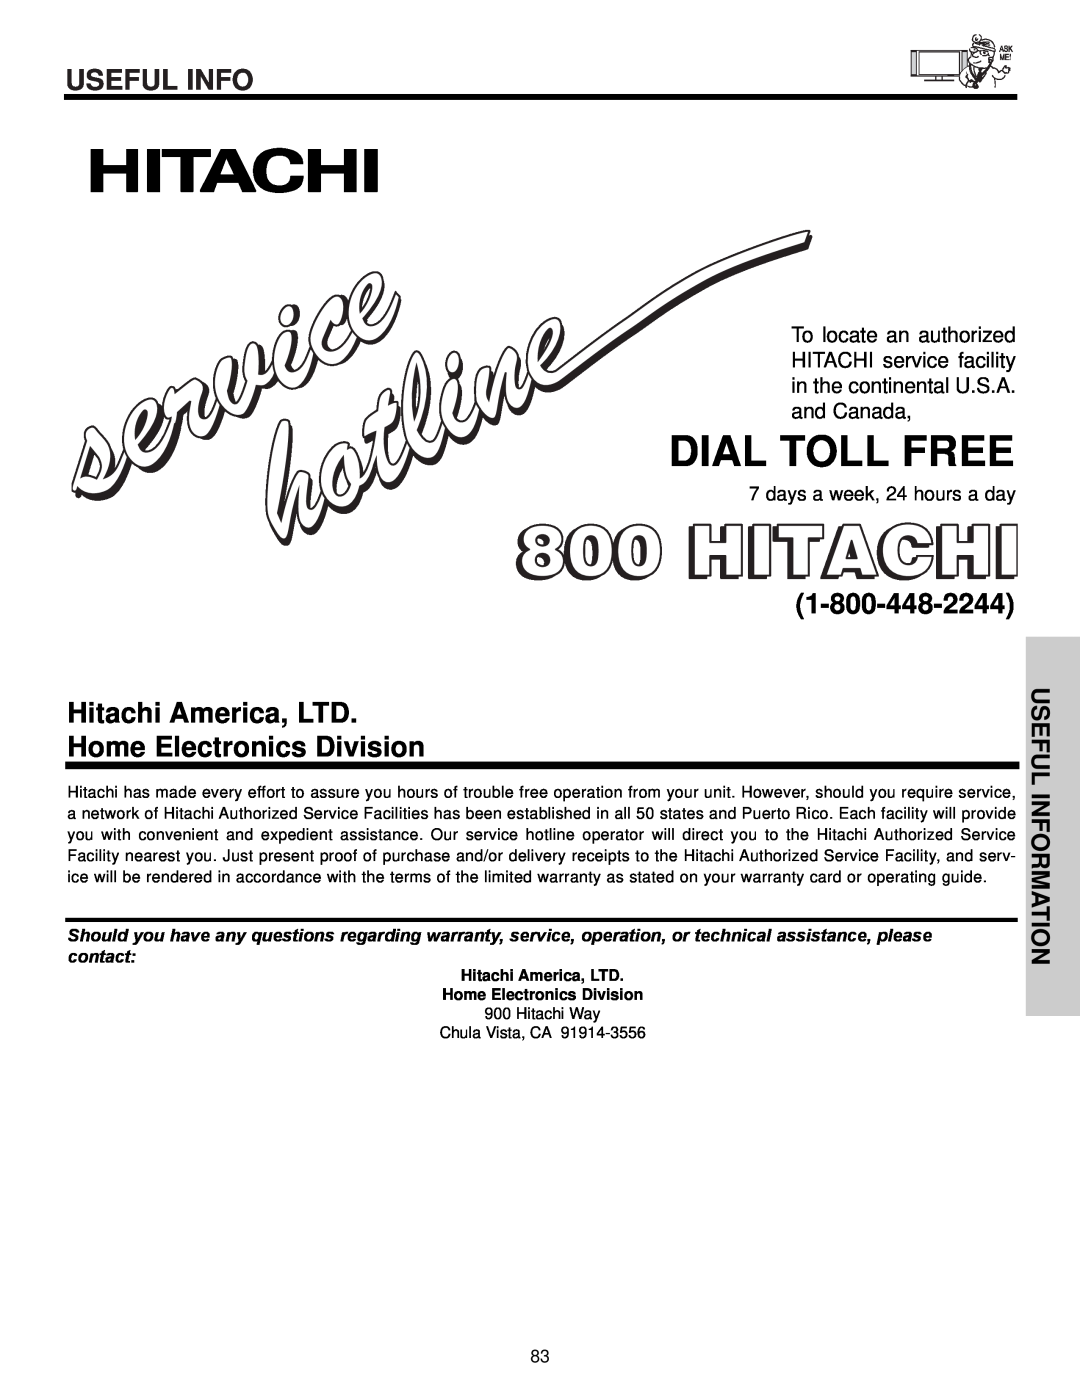 Hitachi 32HDX60 Dial Toll Free, Useful Information, days a week, 24 hours a day, Home Electronics Division 